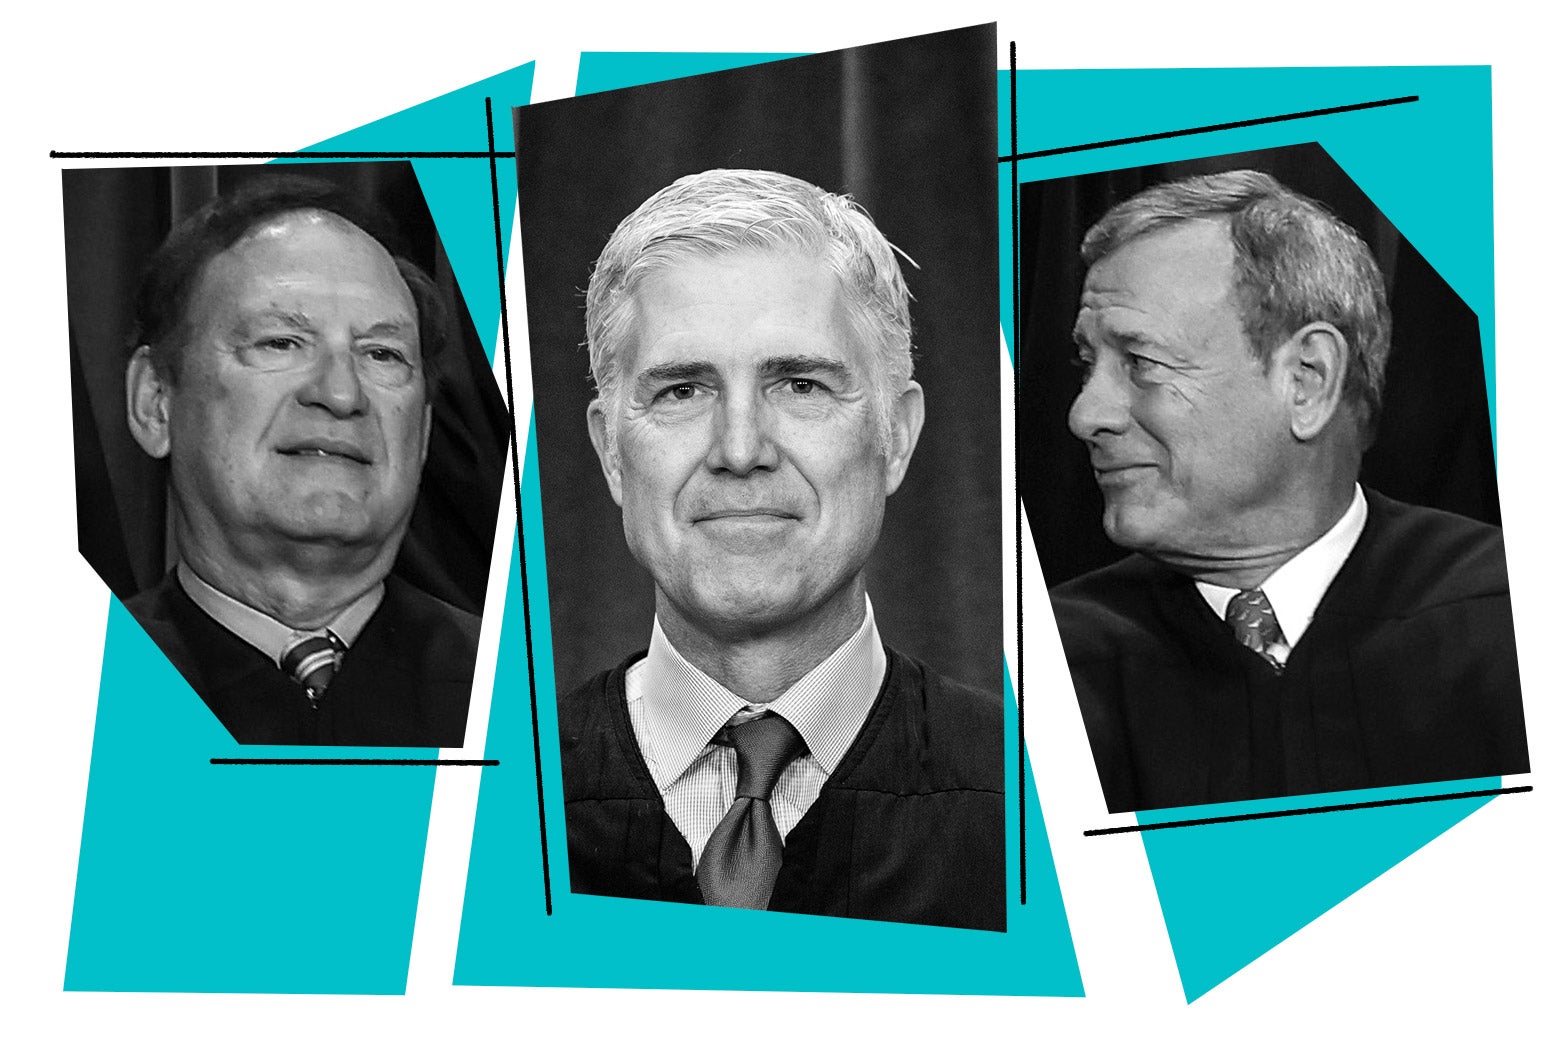 Supreme Court Justices Samuel Alito, Neil Gorsuch, and John Roberts.